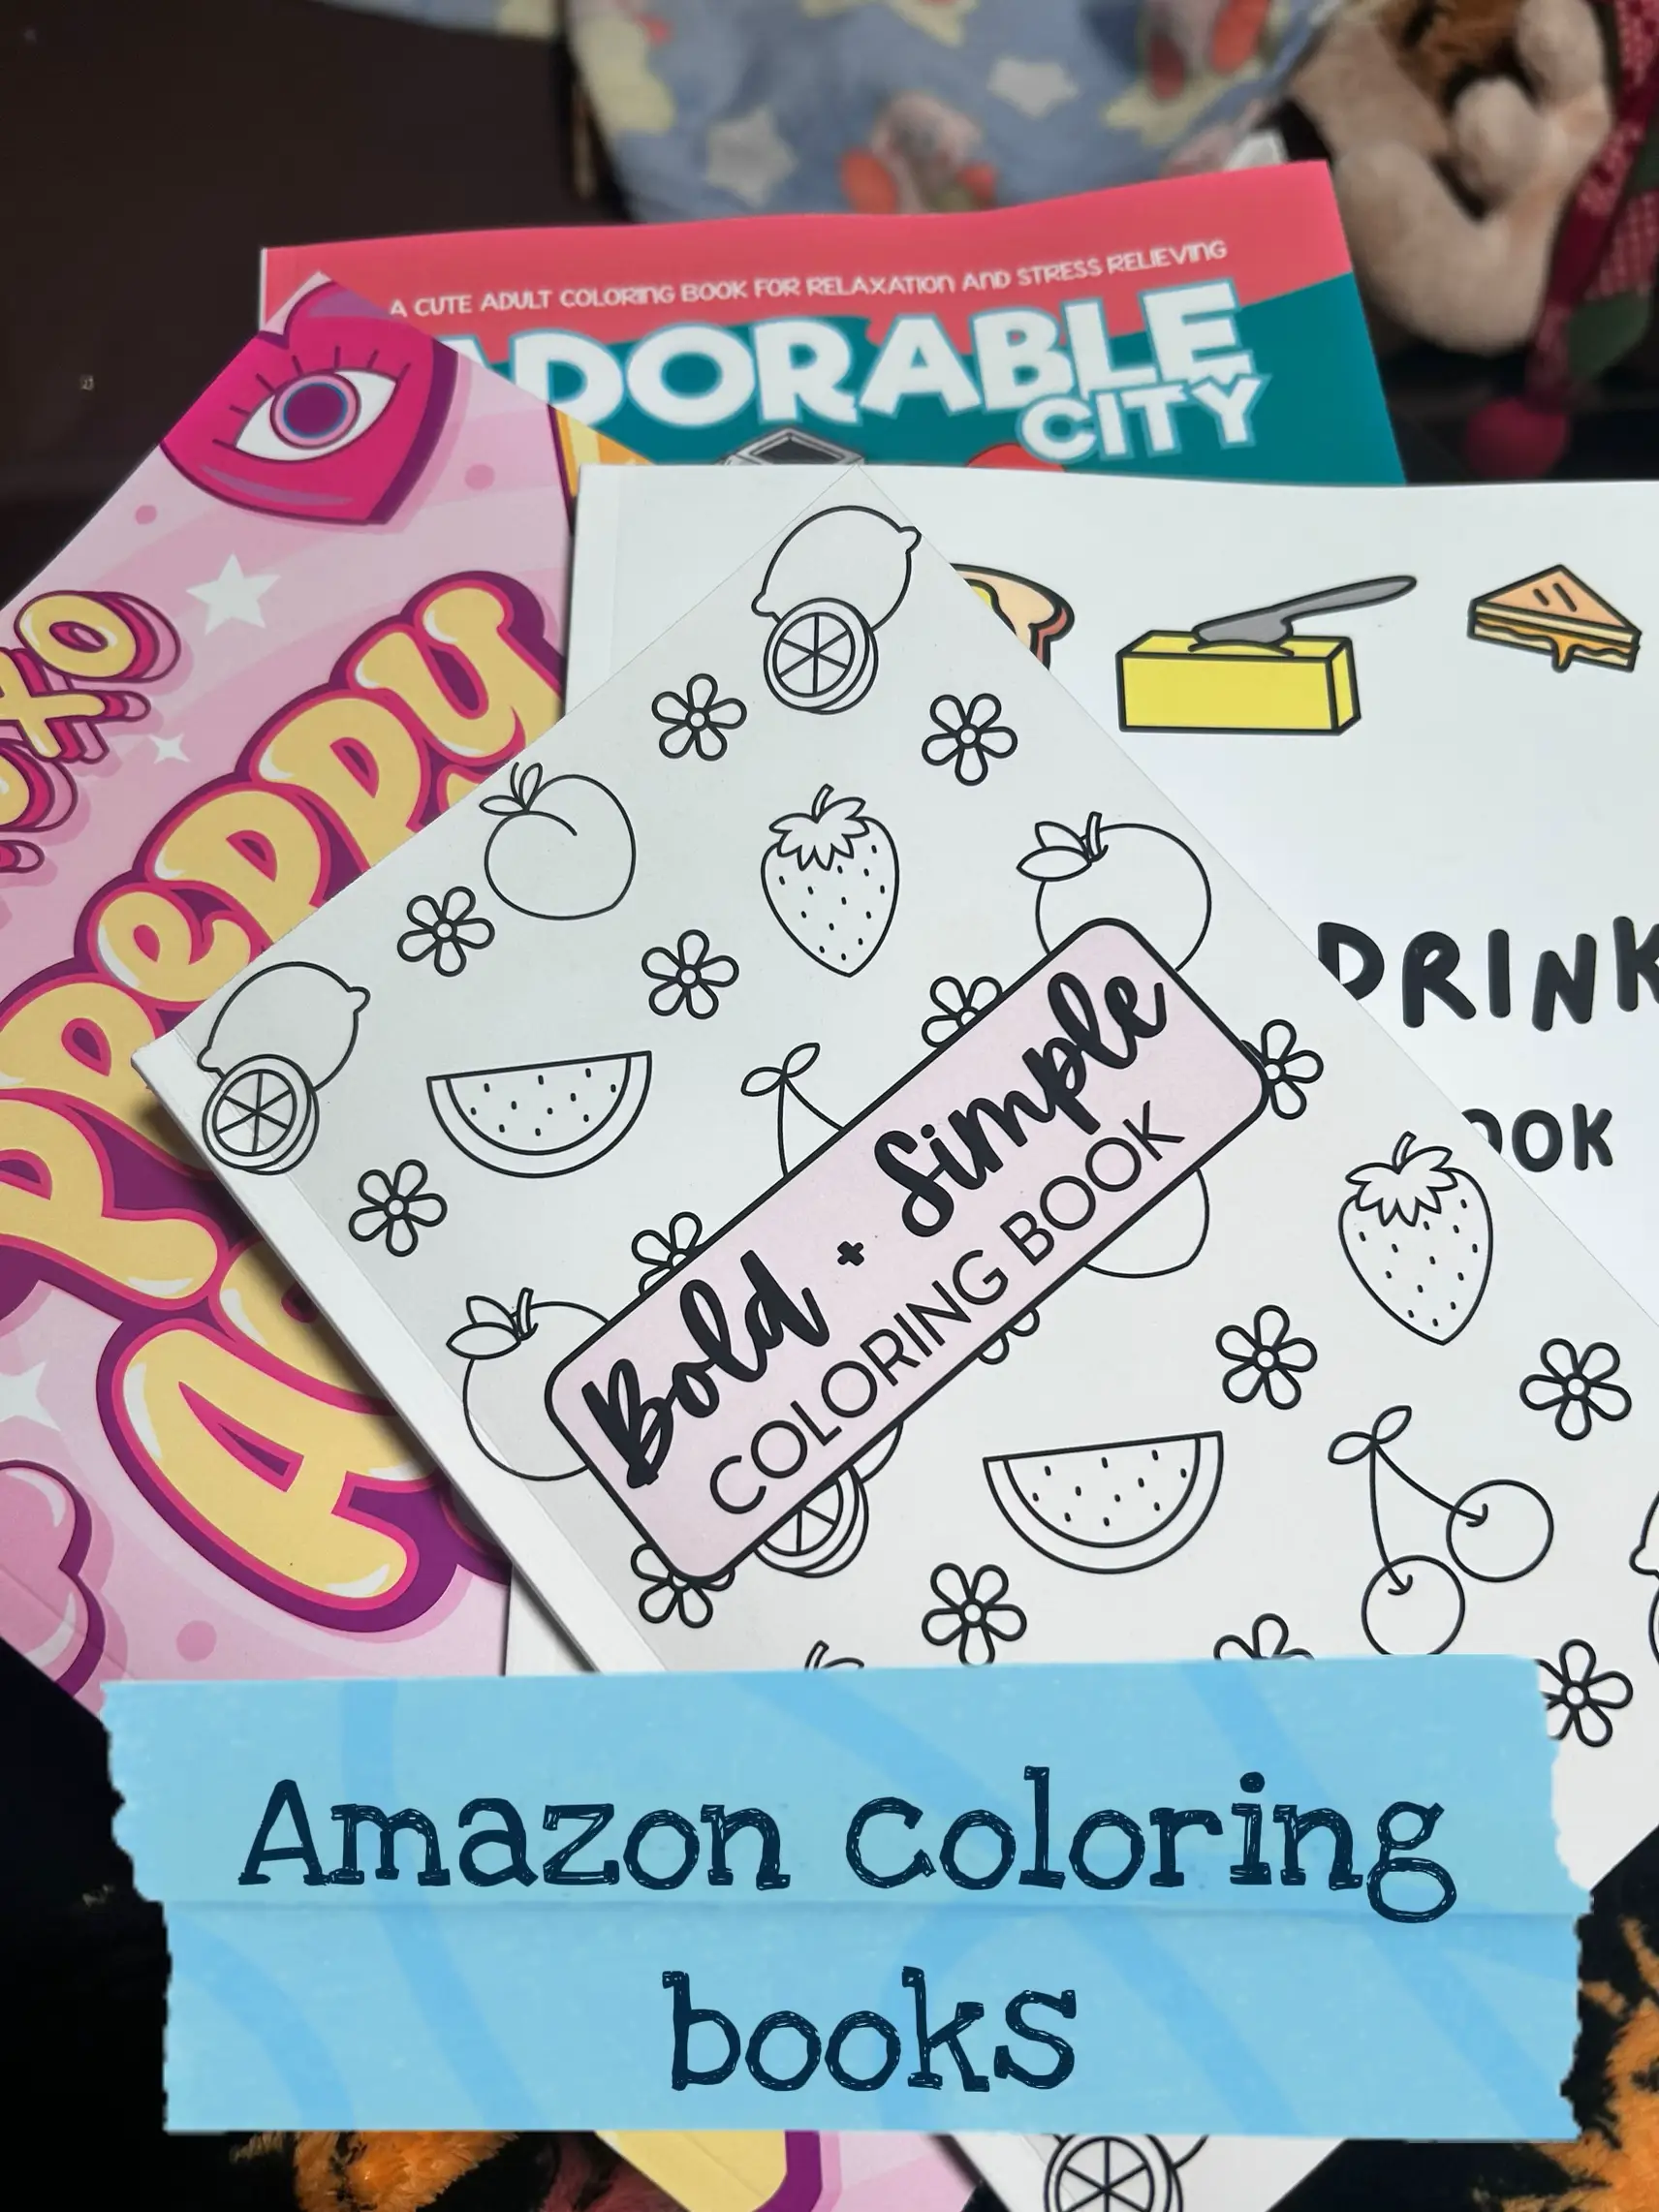 My opinion about TOOLI-ART set of 36 acrylic markers 'Skin + Earth'  #coloring #adultcoloring 